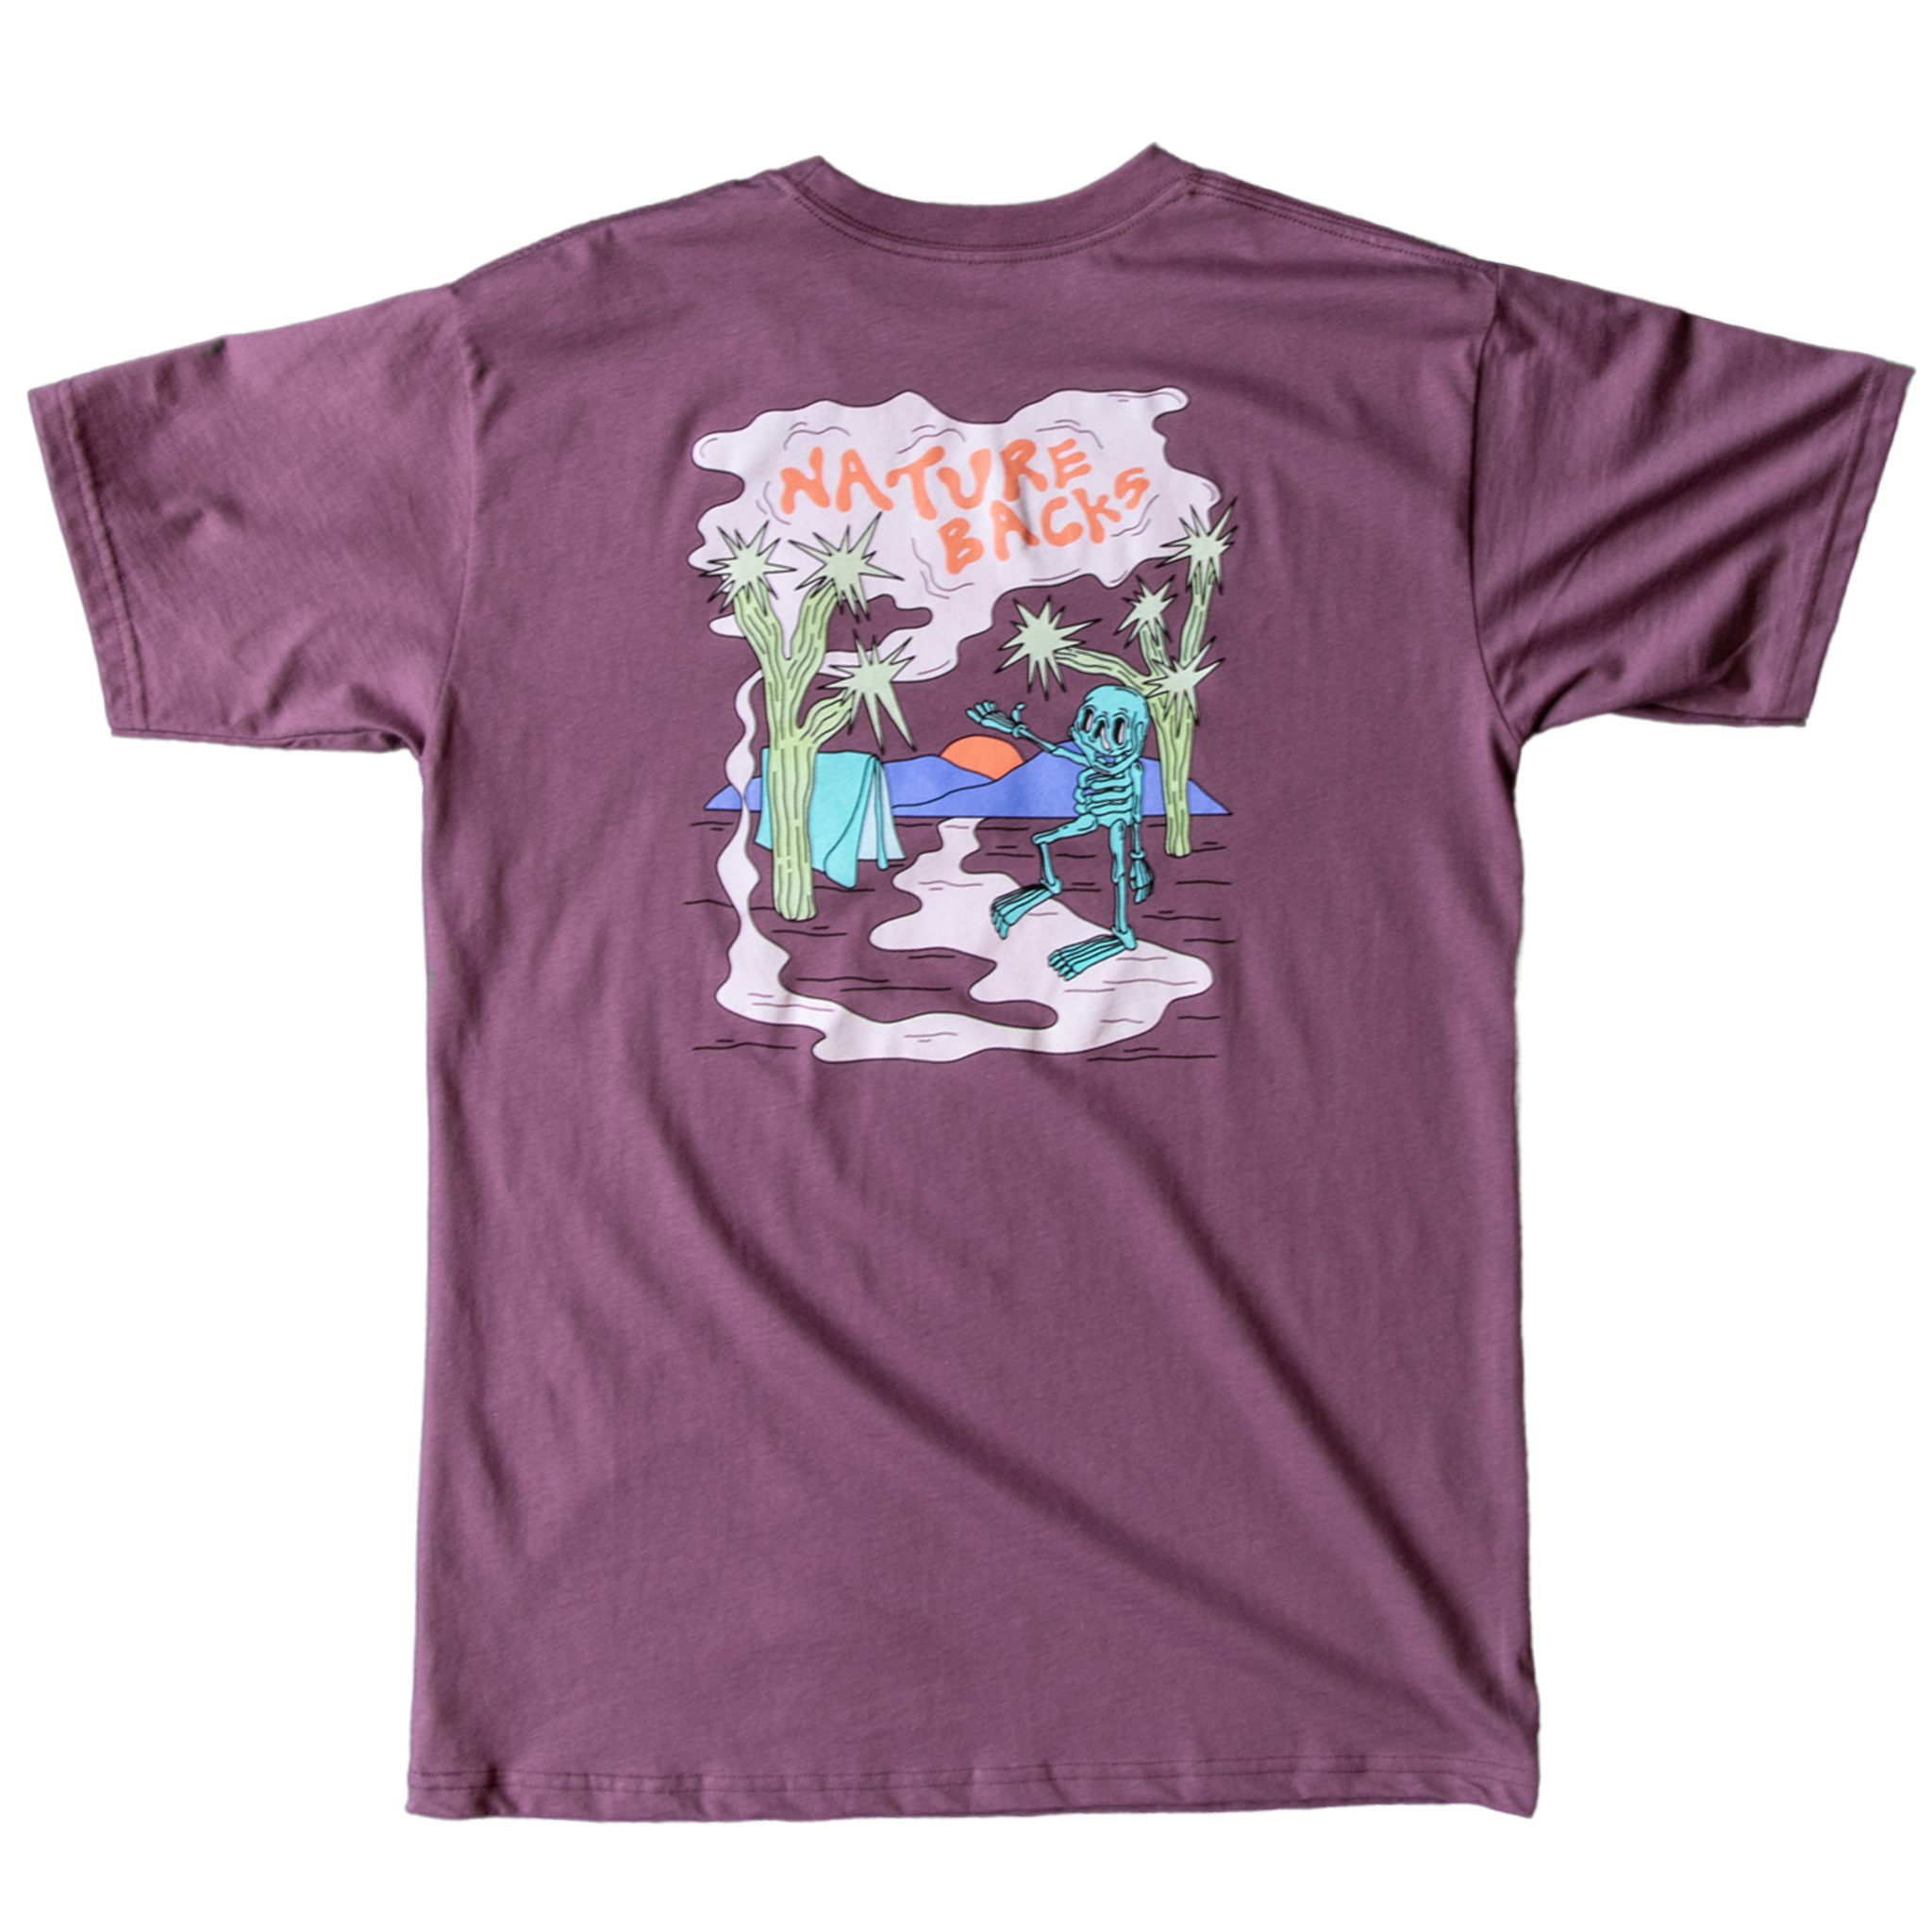 Nature Backs Limited Edition Short Sleeve 100% Organic Cotton T-Shirt | Limited Sundazed Berry Short Sleeve made with Eco-Friendly Fibers Sustainably made in the USA 